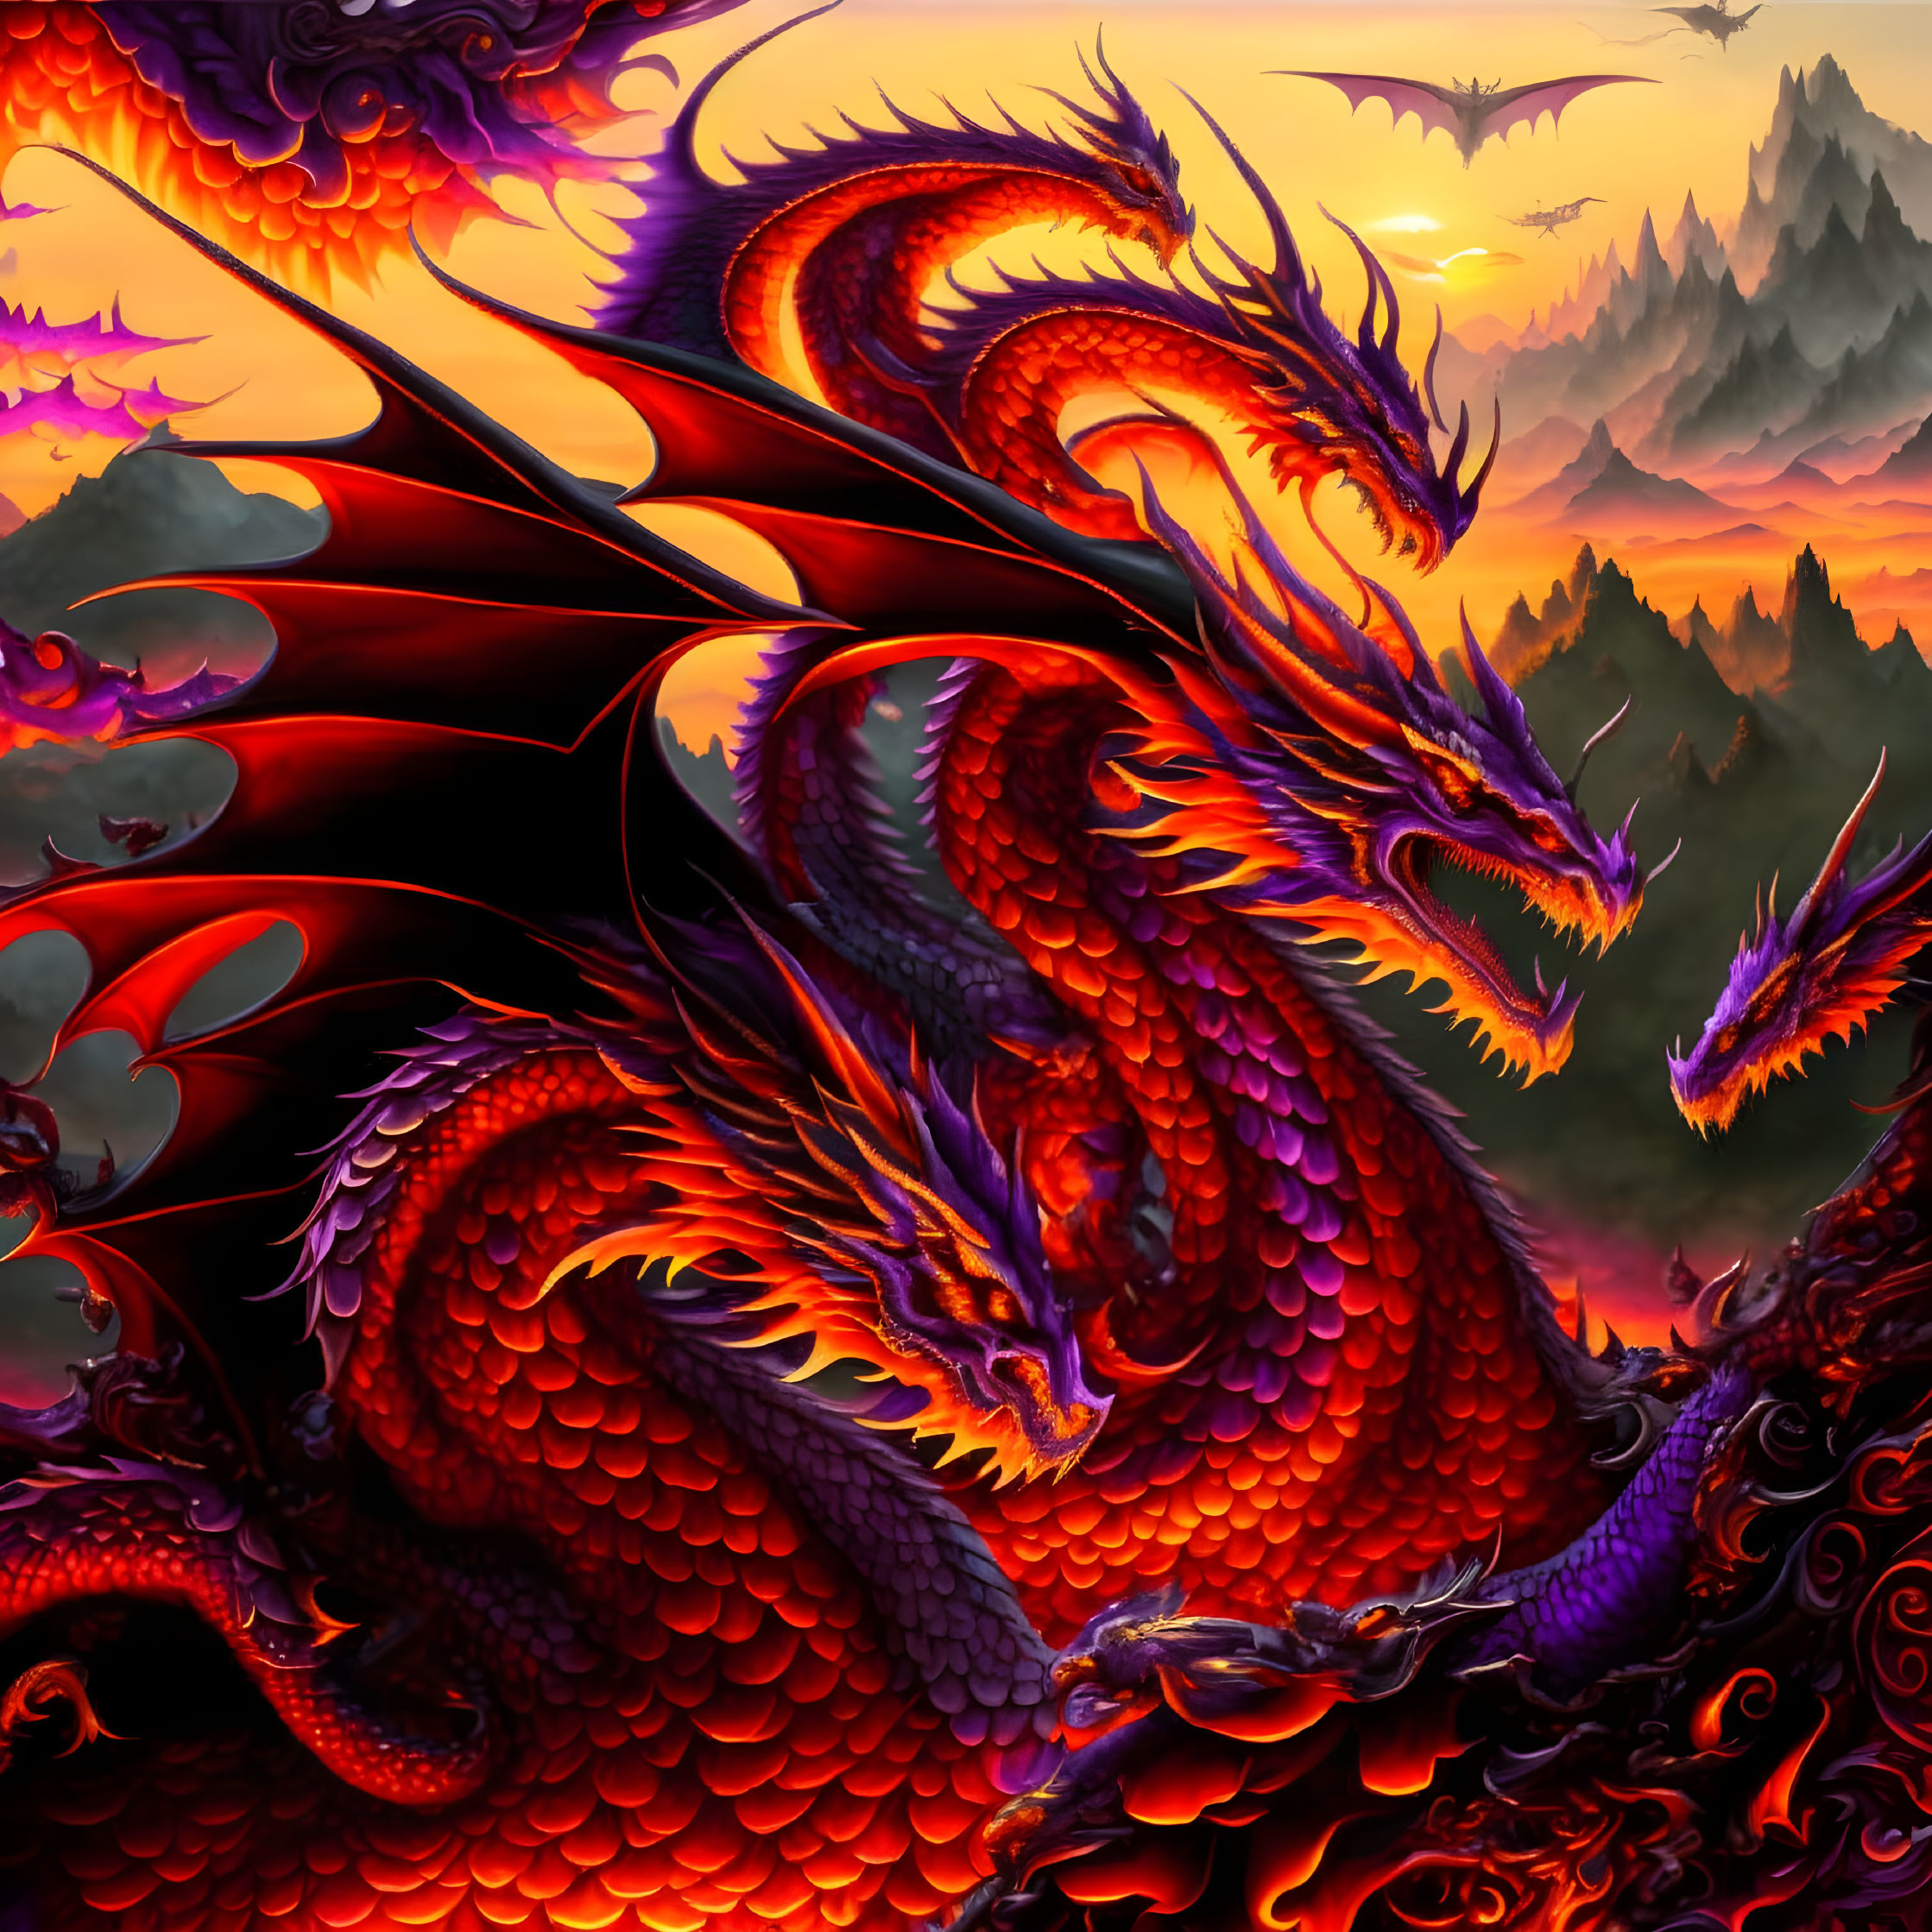 Detailed fiery red dragon illustration in dramatic sunset setting.